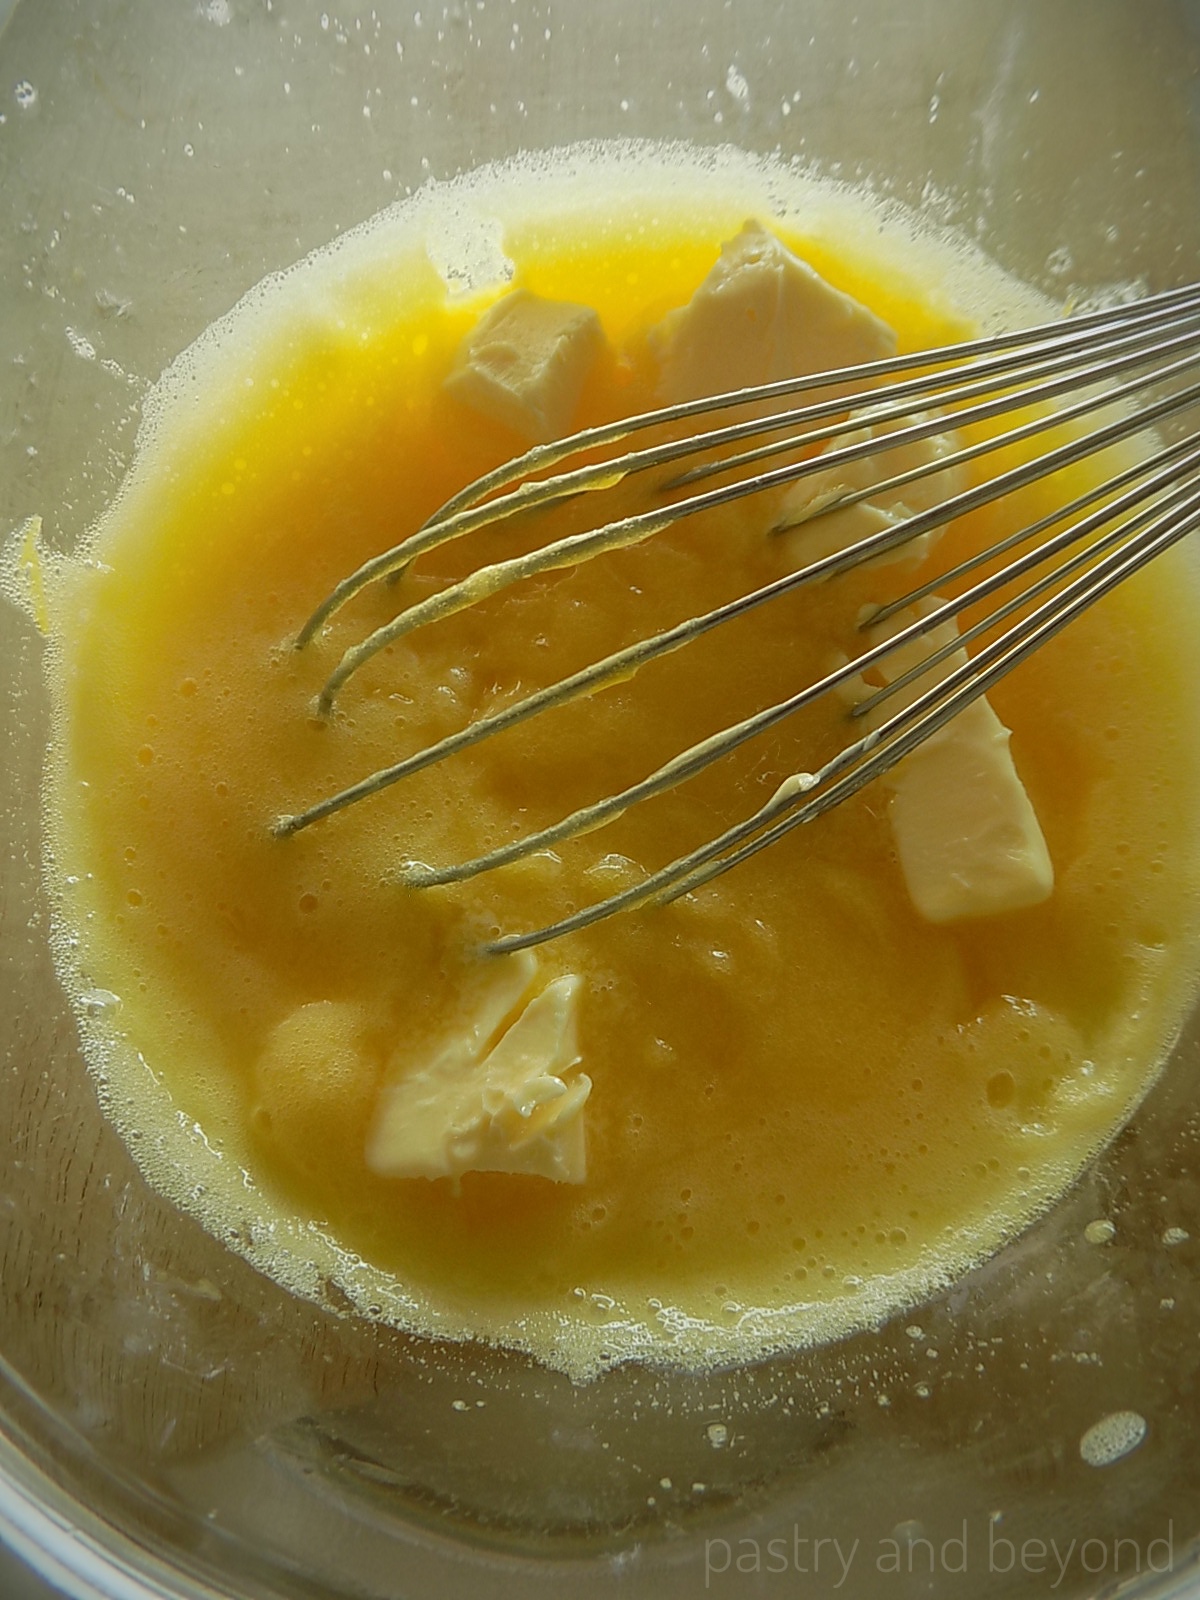 Cubed butter added into the mixture and mixed with a whisk.